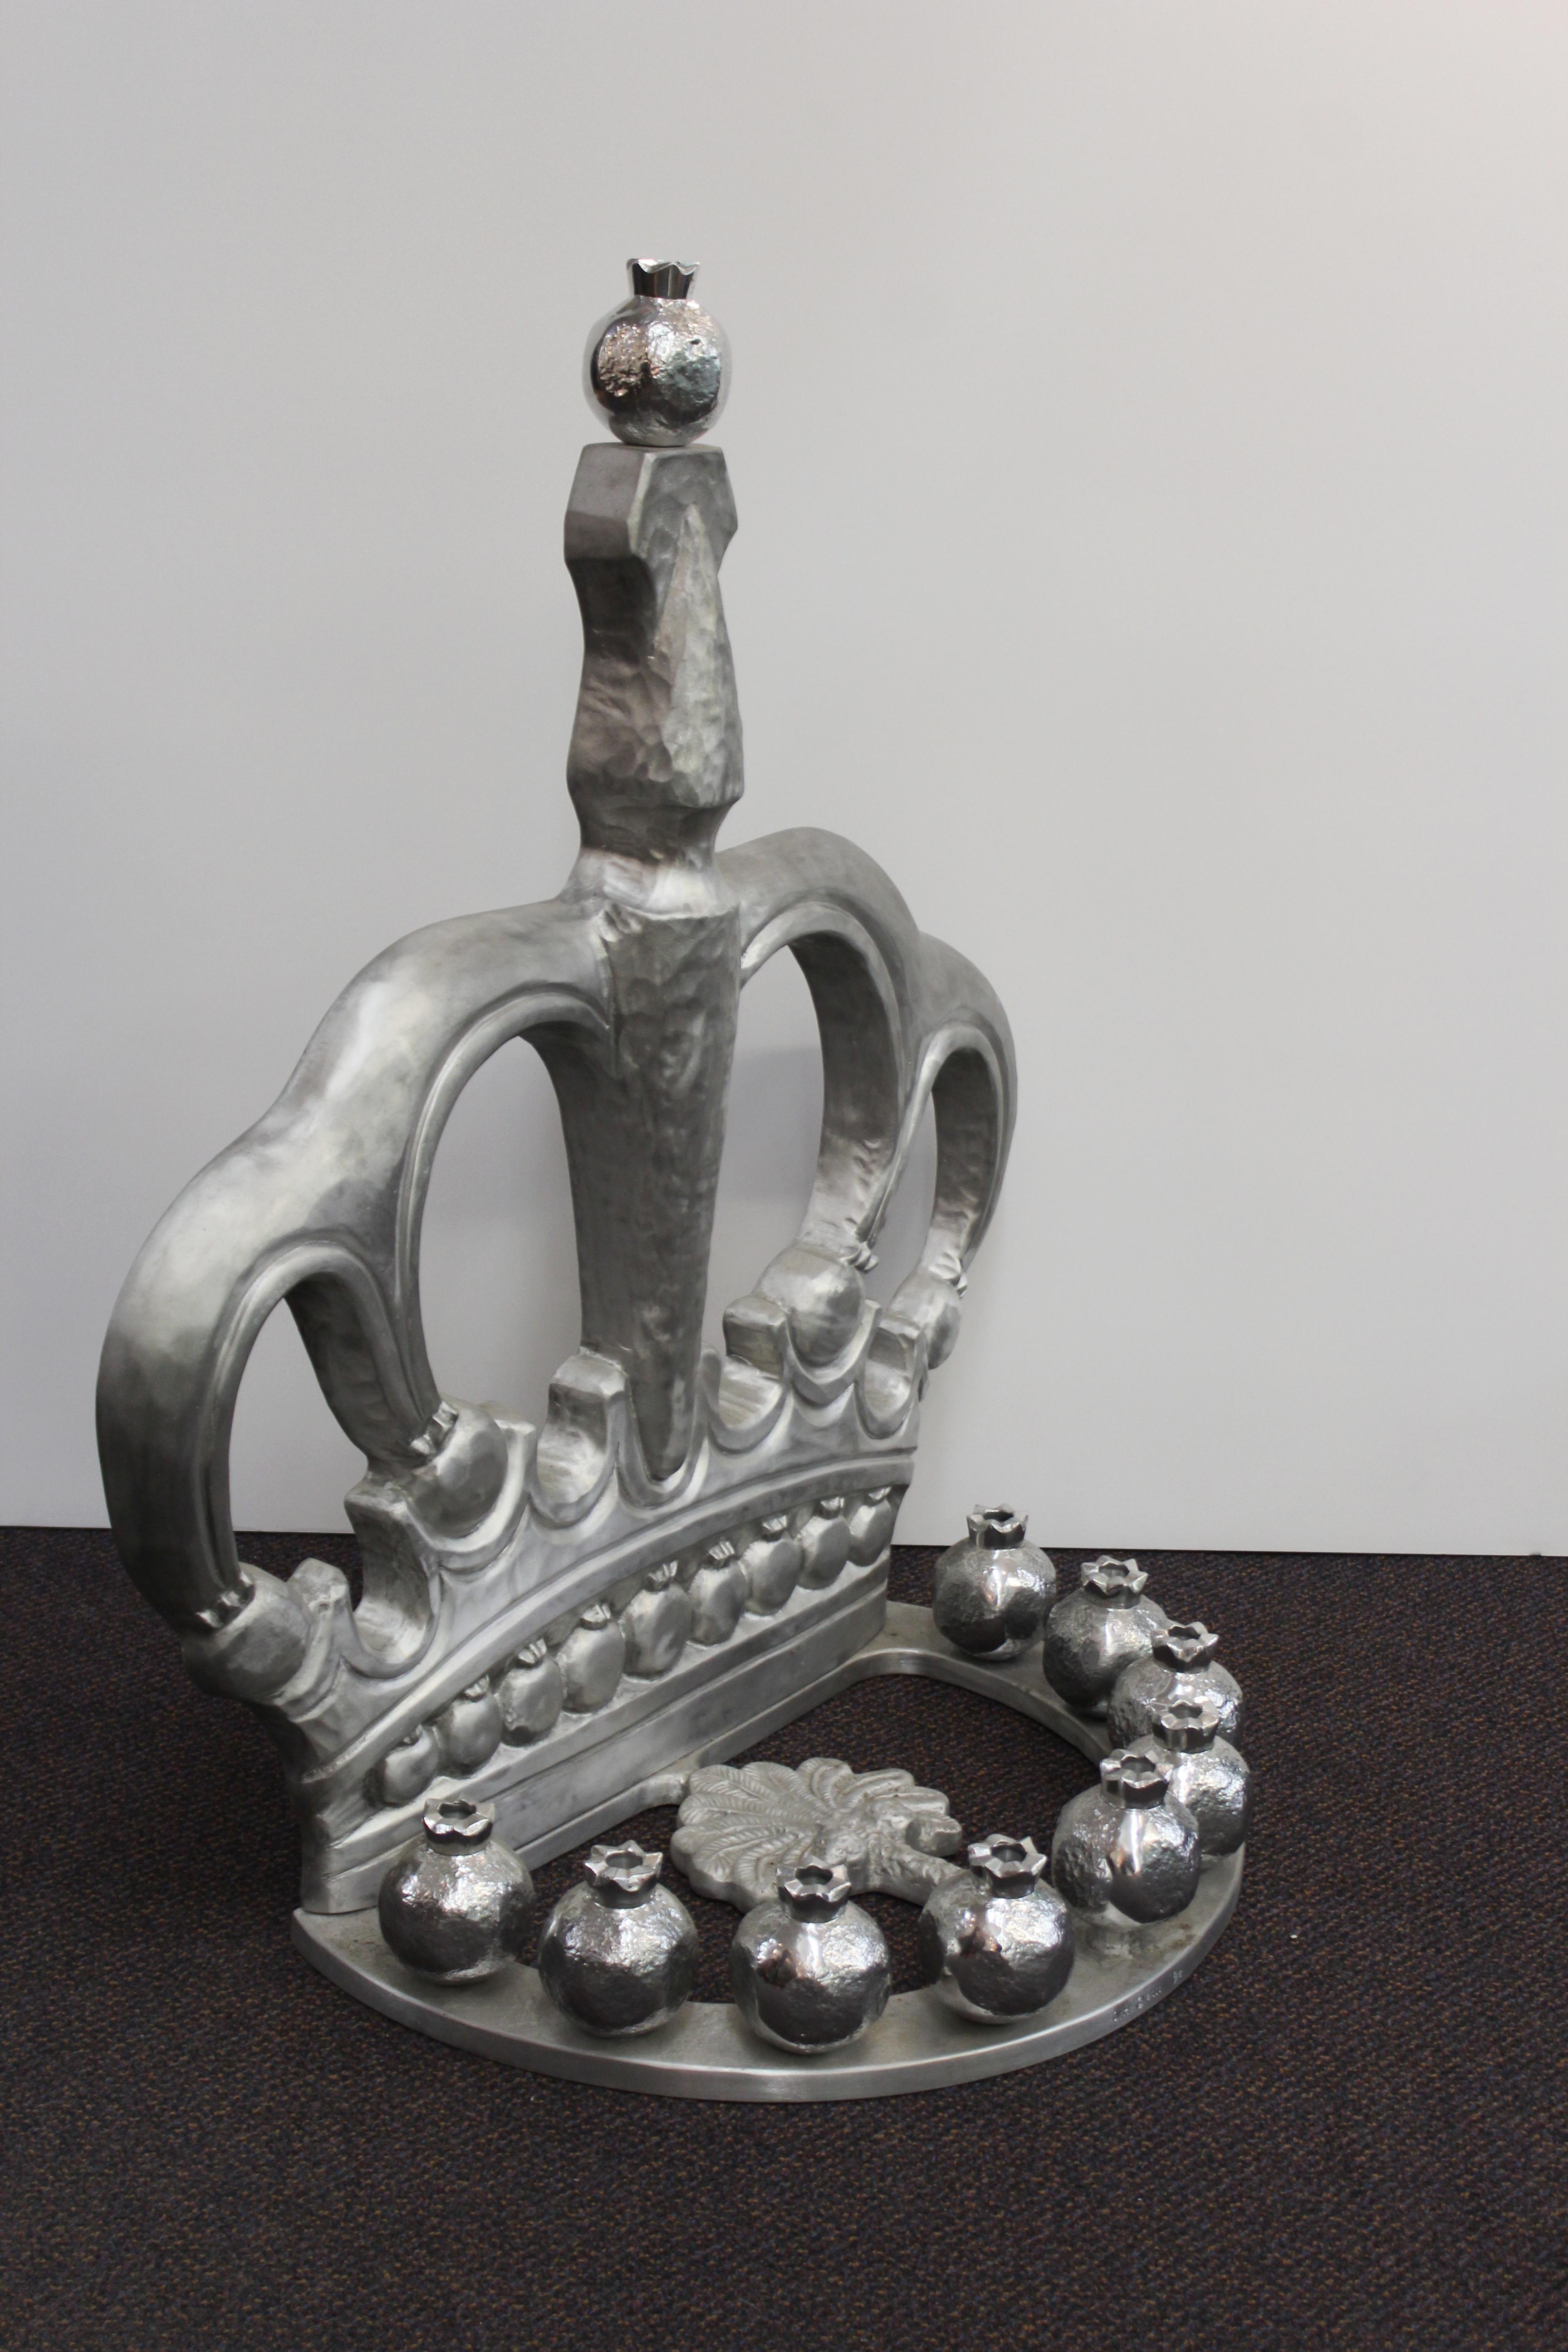 Oded Halahmy sculpture titles 'Crowning the Universe' in aluminum cast. Signed and dated 2006. The work remains in excellent condition.